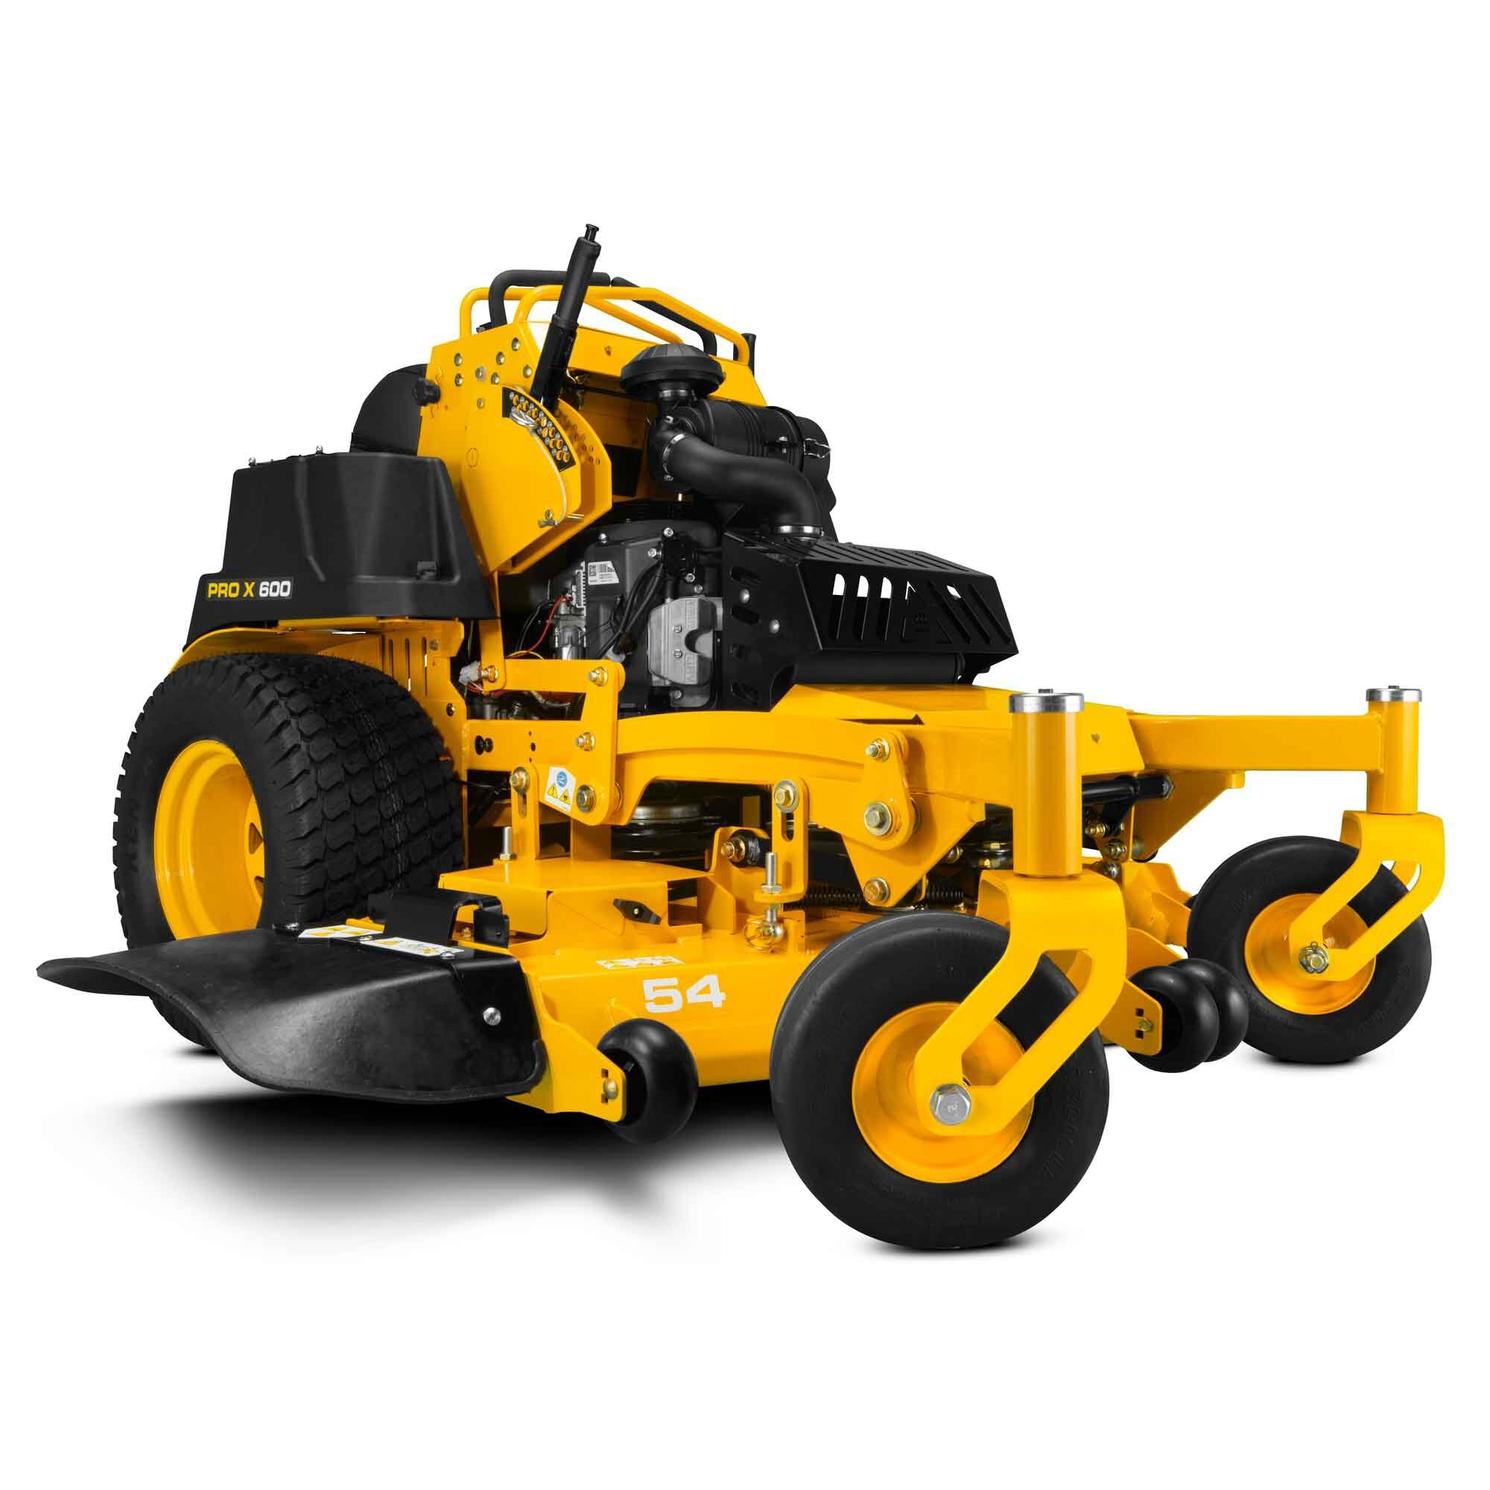 Cub Cadet Commercial Stand-On Mowers PRO X 654 EFI